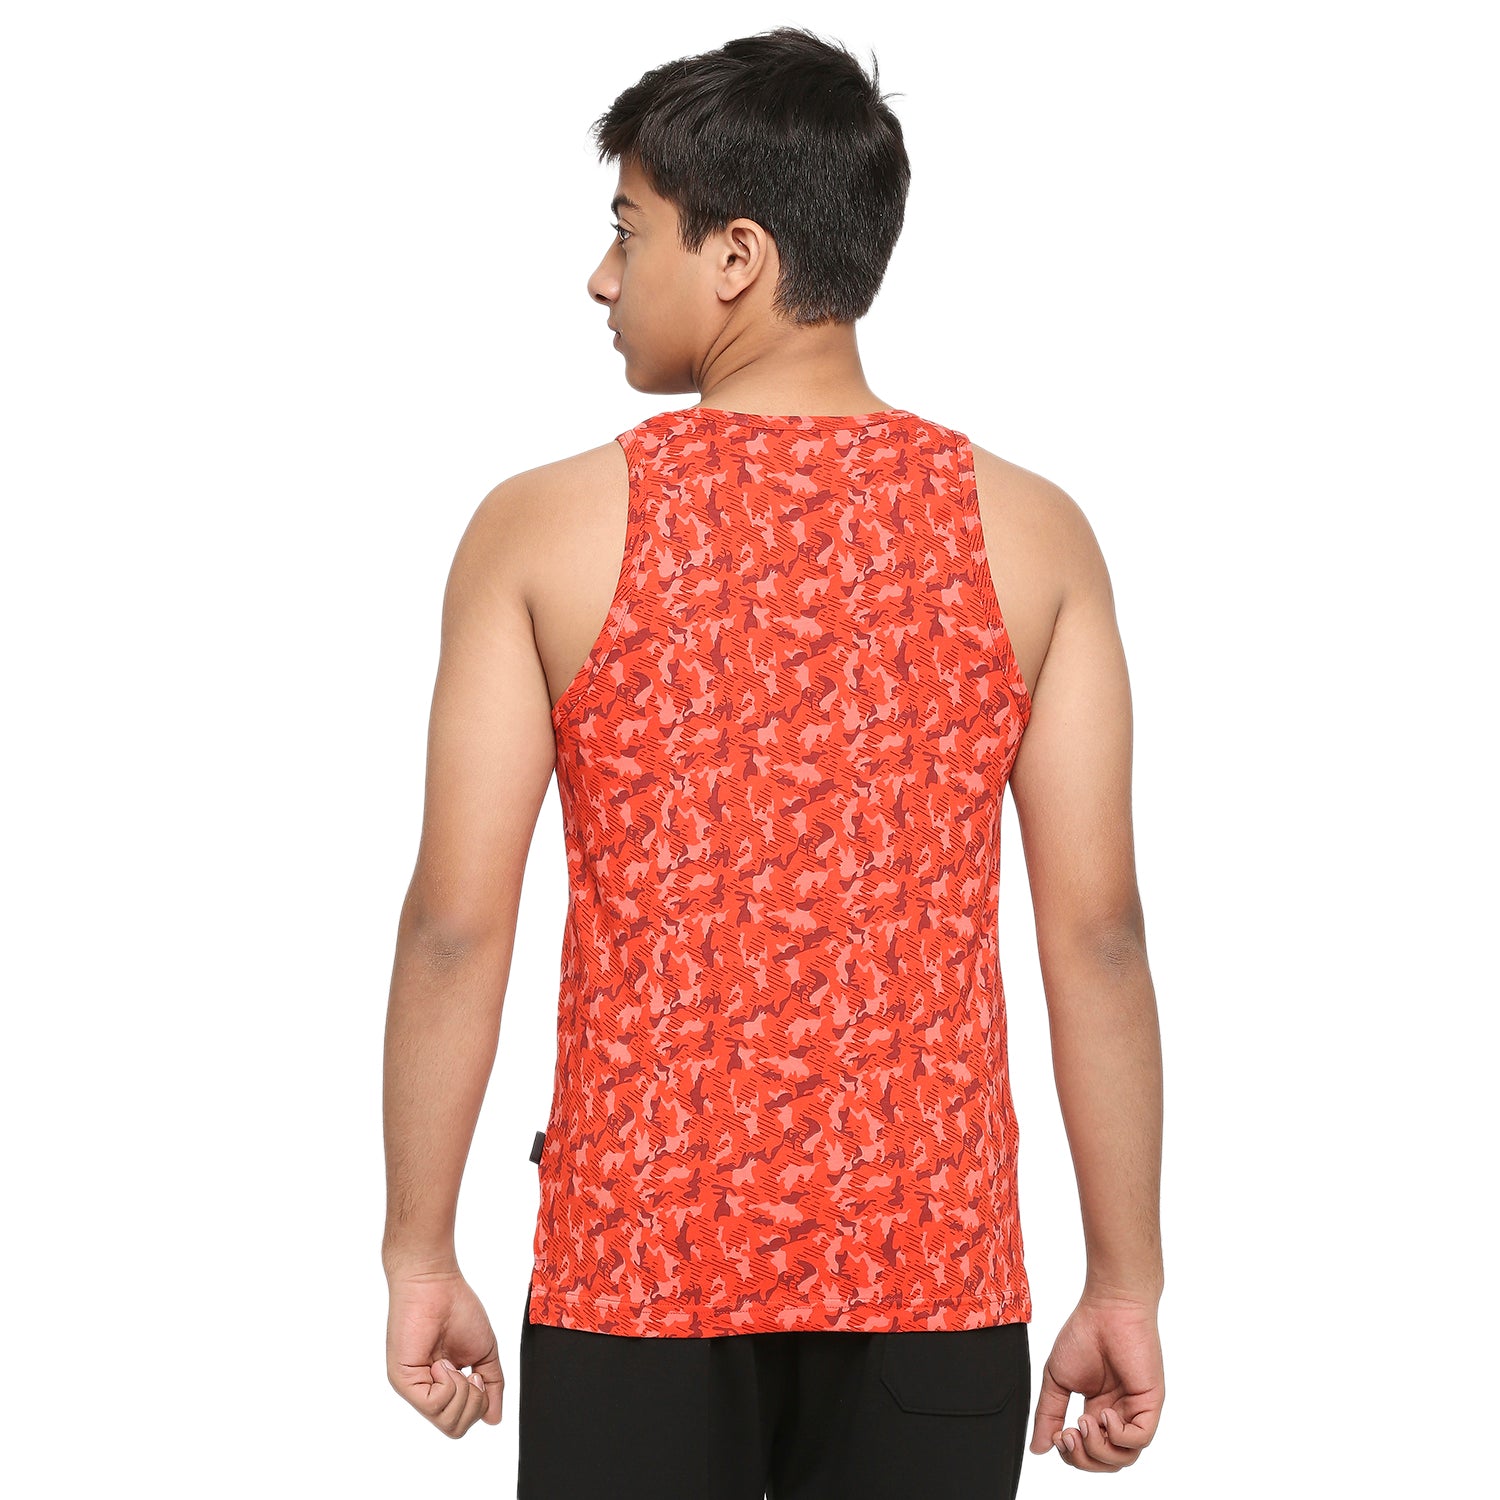 Frenchie U-19 Teens Red Vest in Camouflage Print